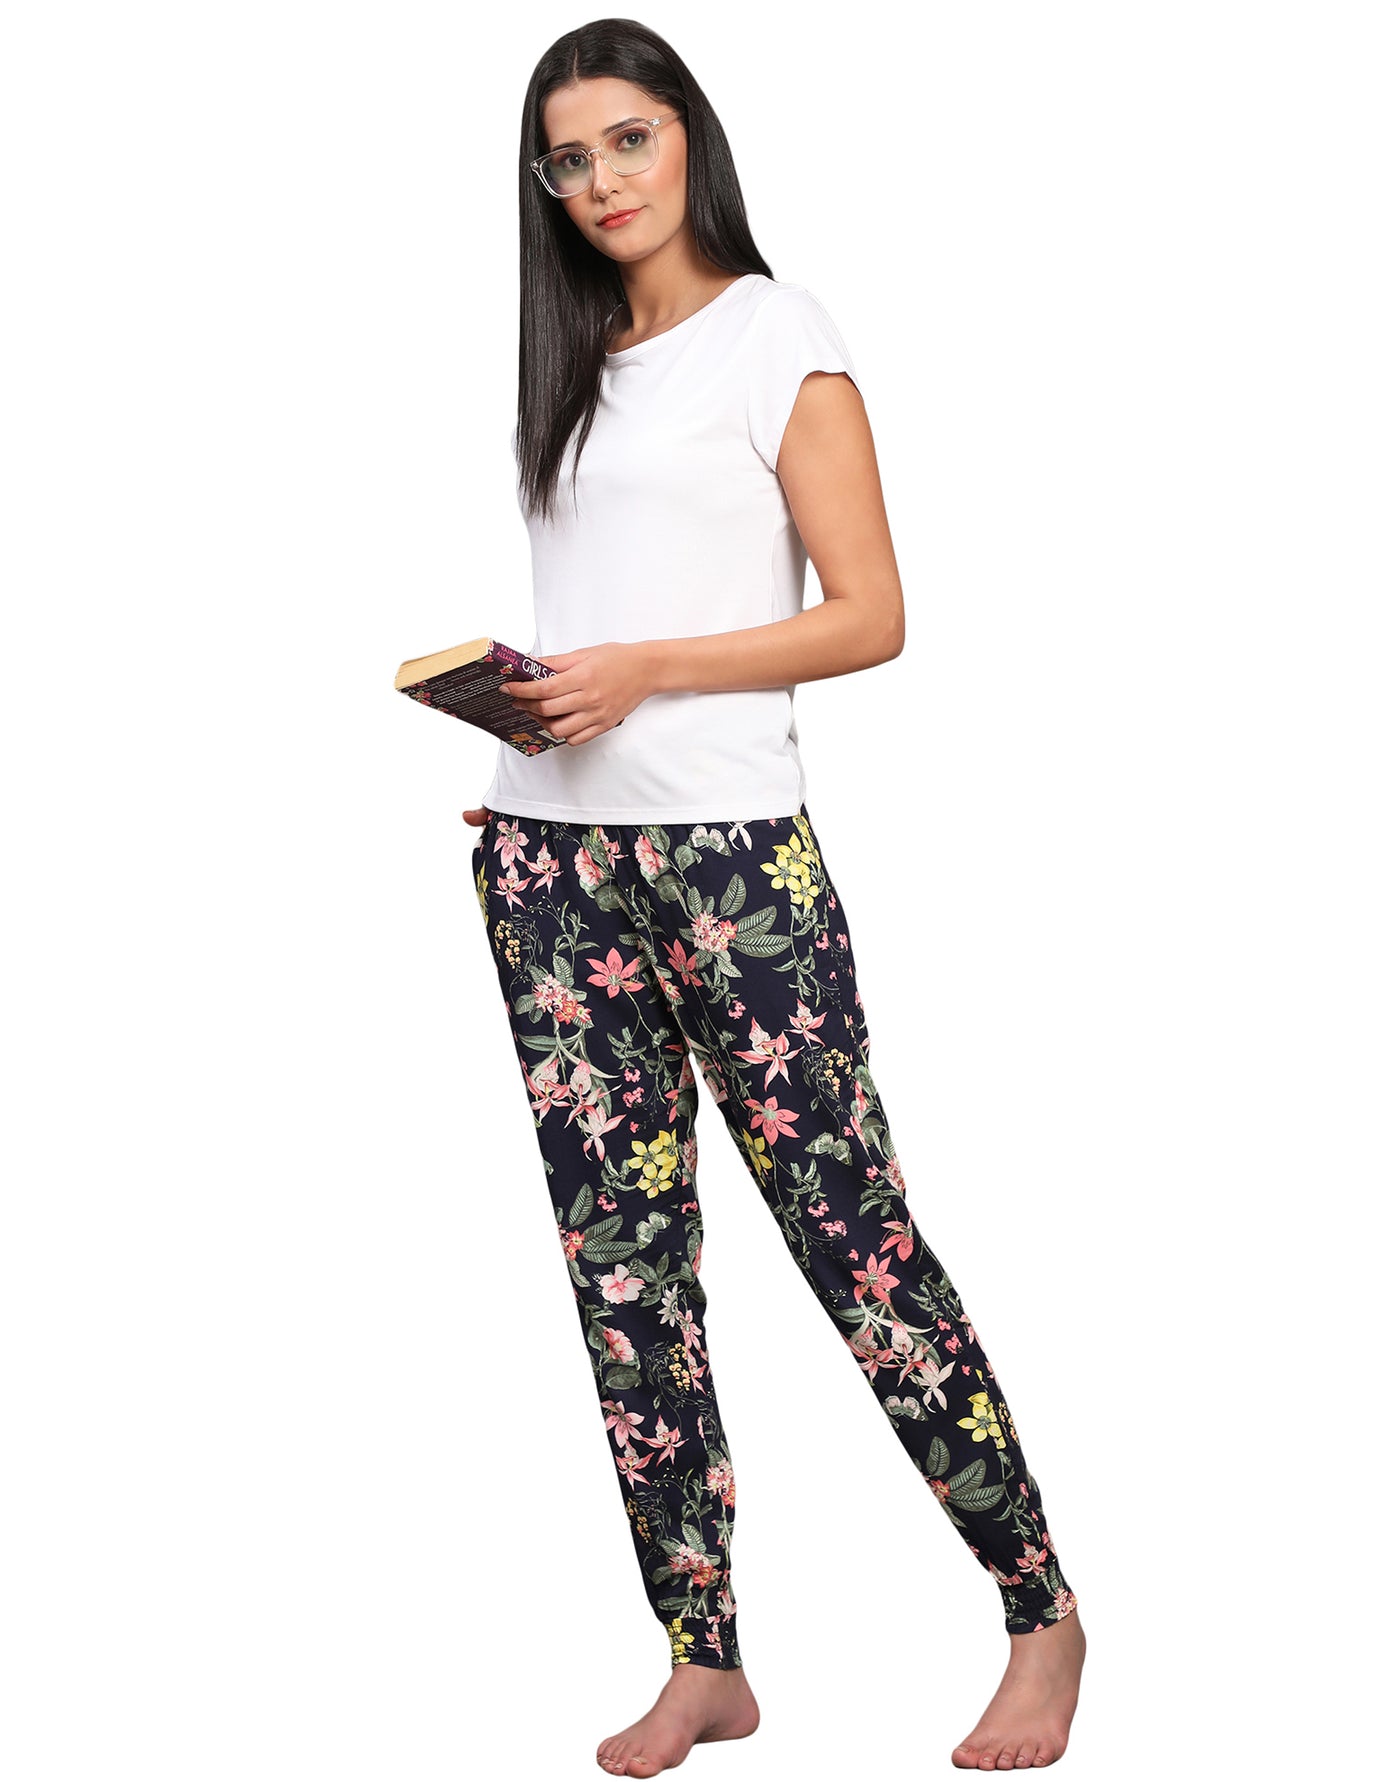 Lounge Pant for Women-Navy Garden Butterfly Print Smocking Pant